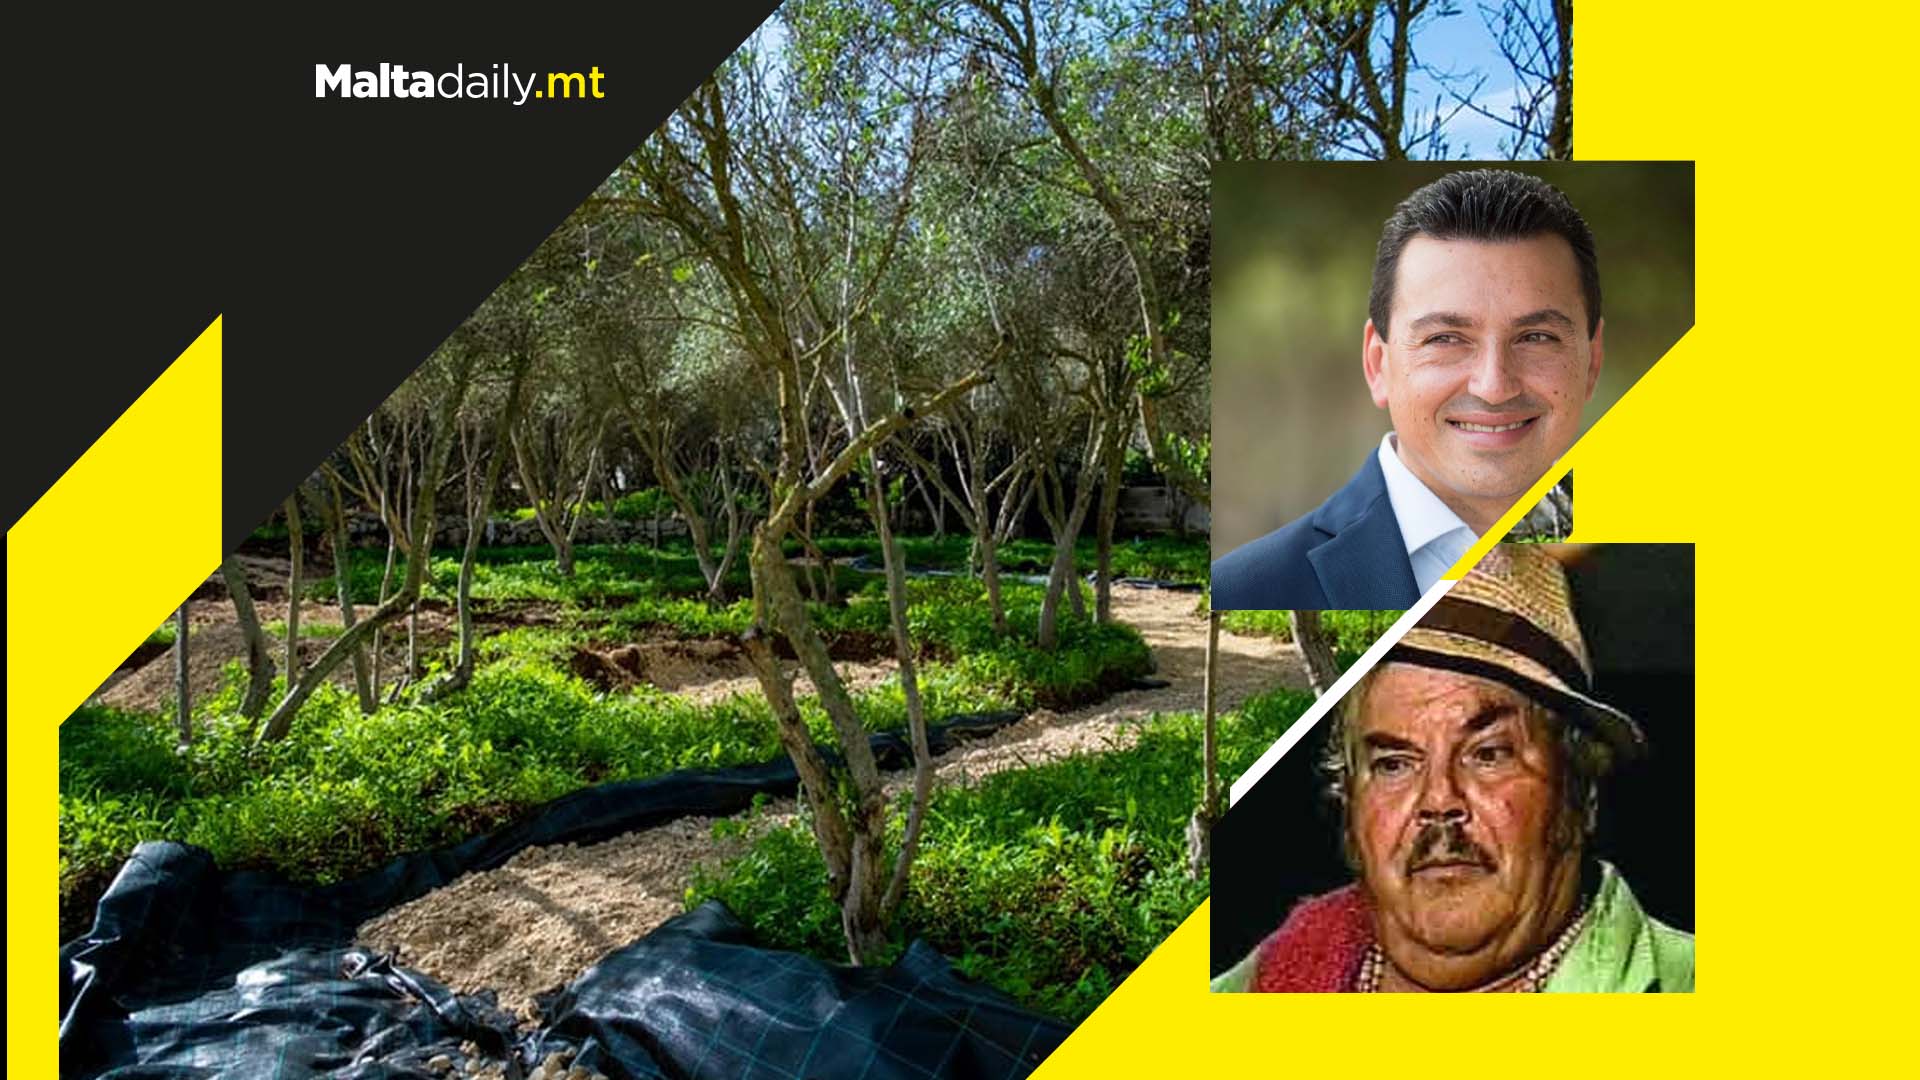 ‘Ċikku Fenech garden’ to be inaugurated as new family garden, minister says